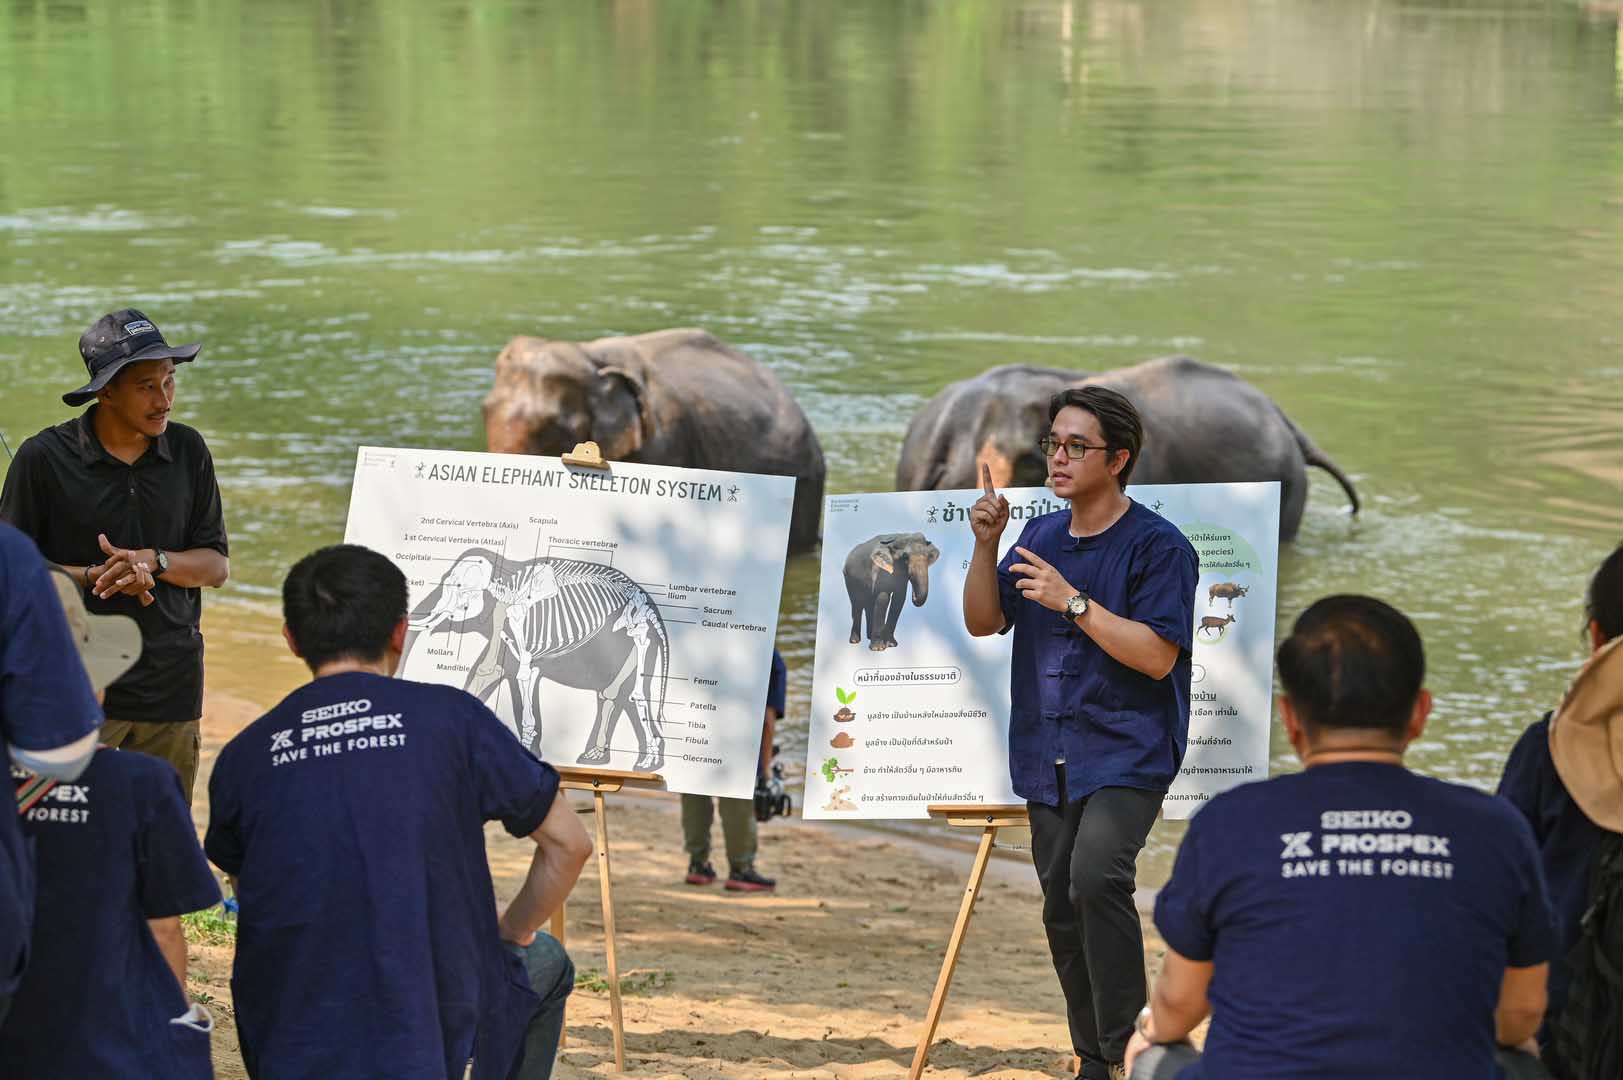 Seiko ‘Save the Forest to Save Our Elephants’